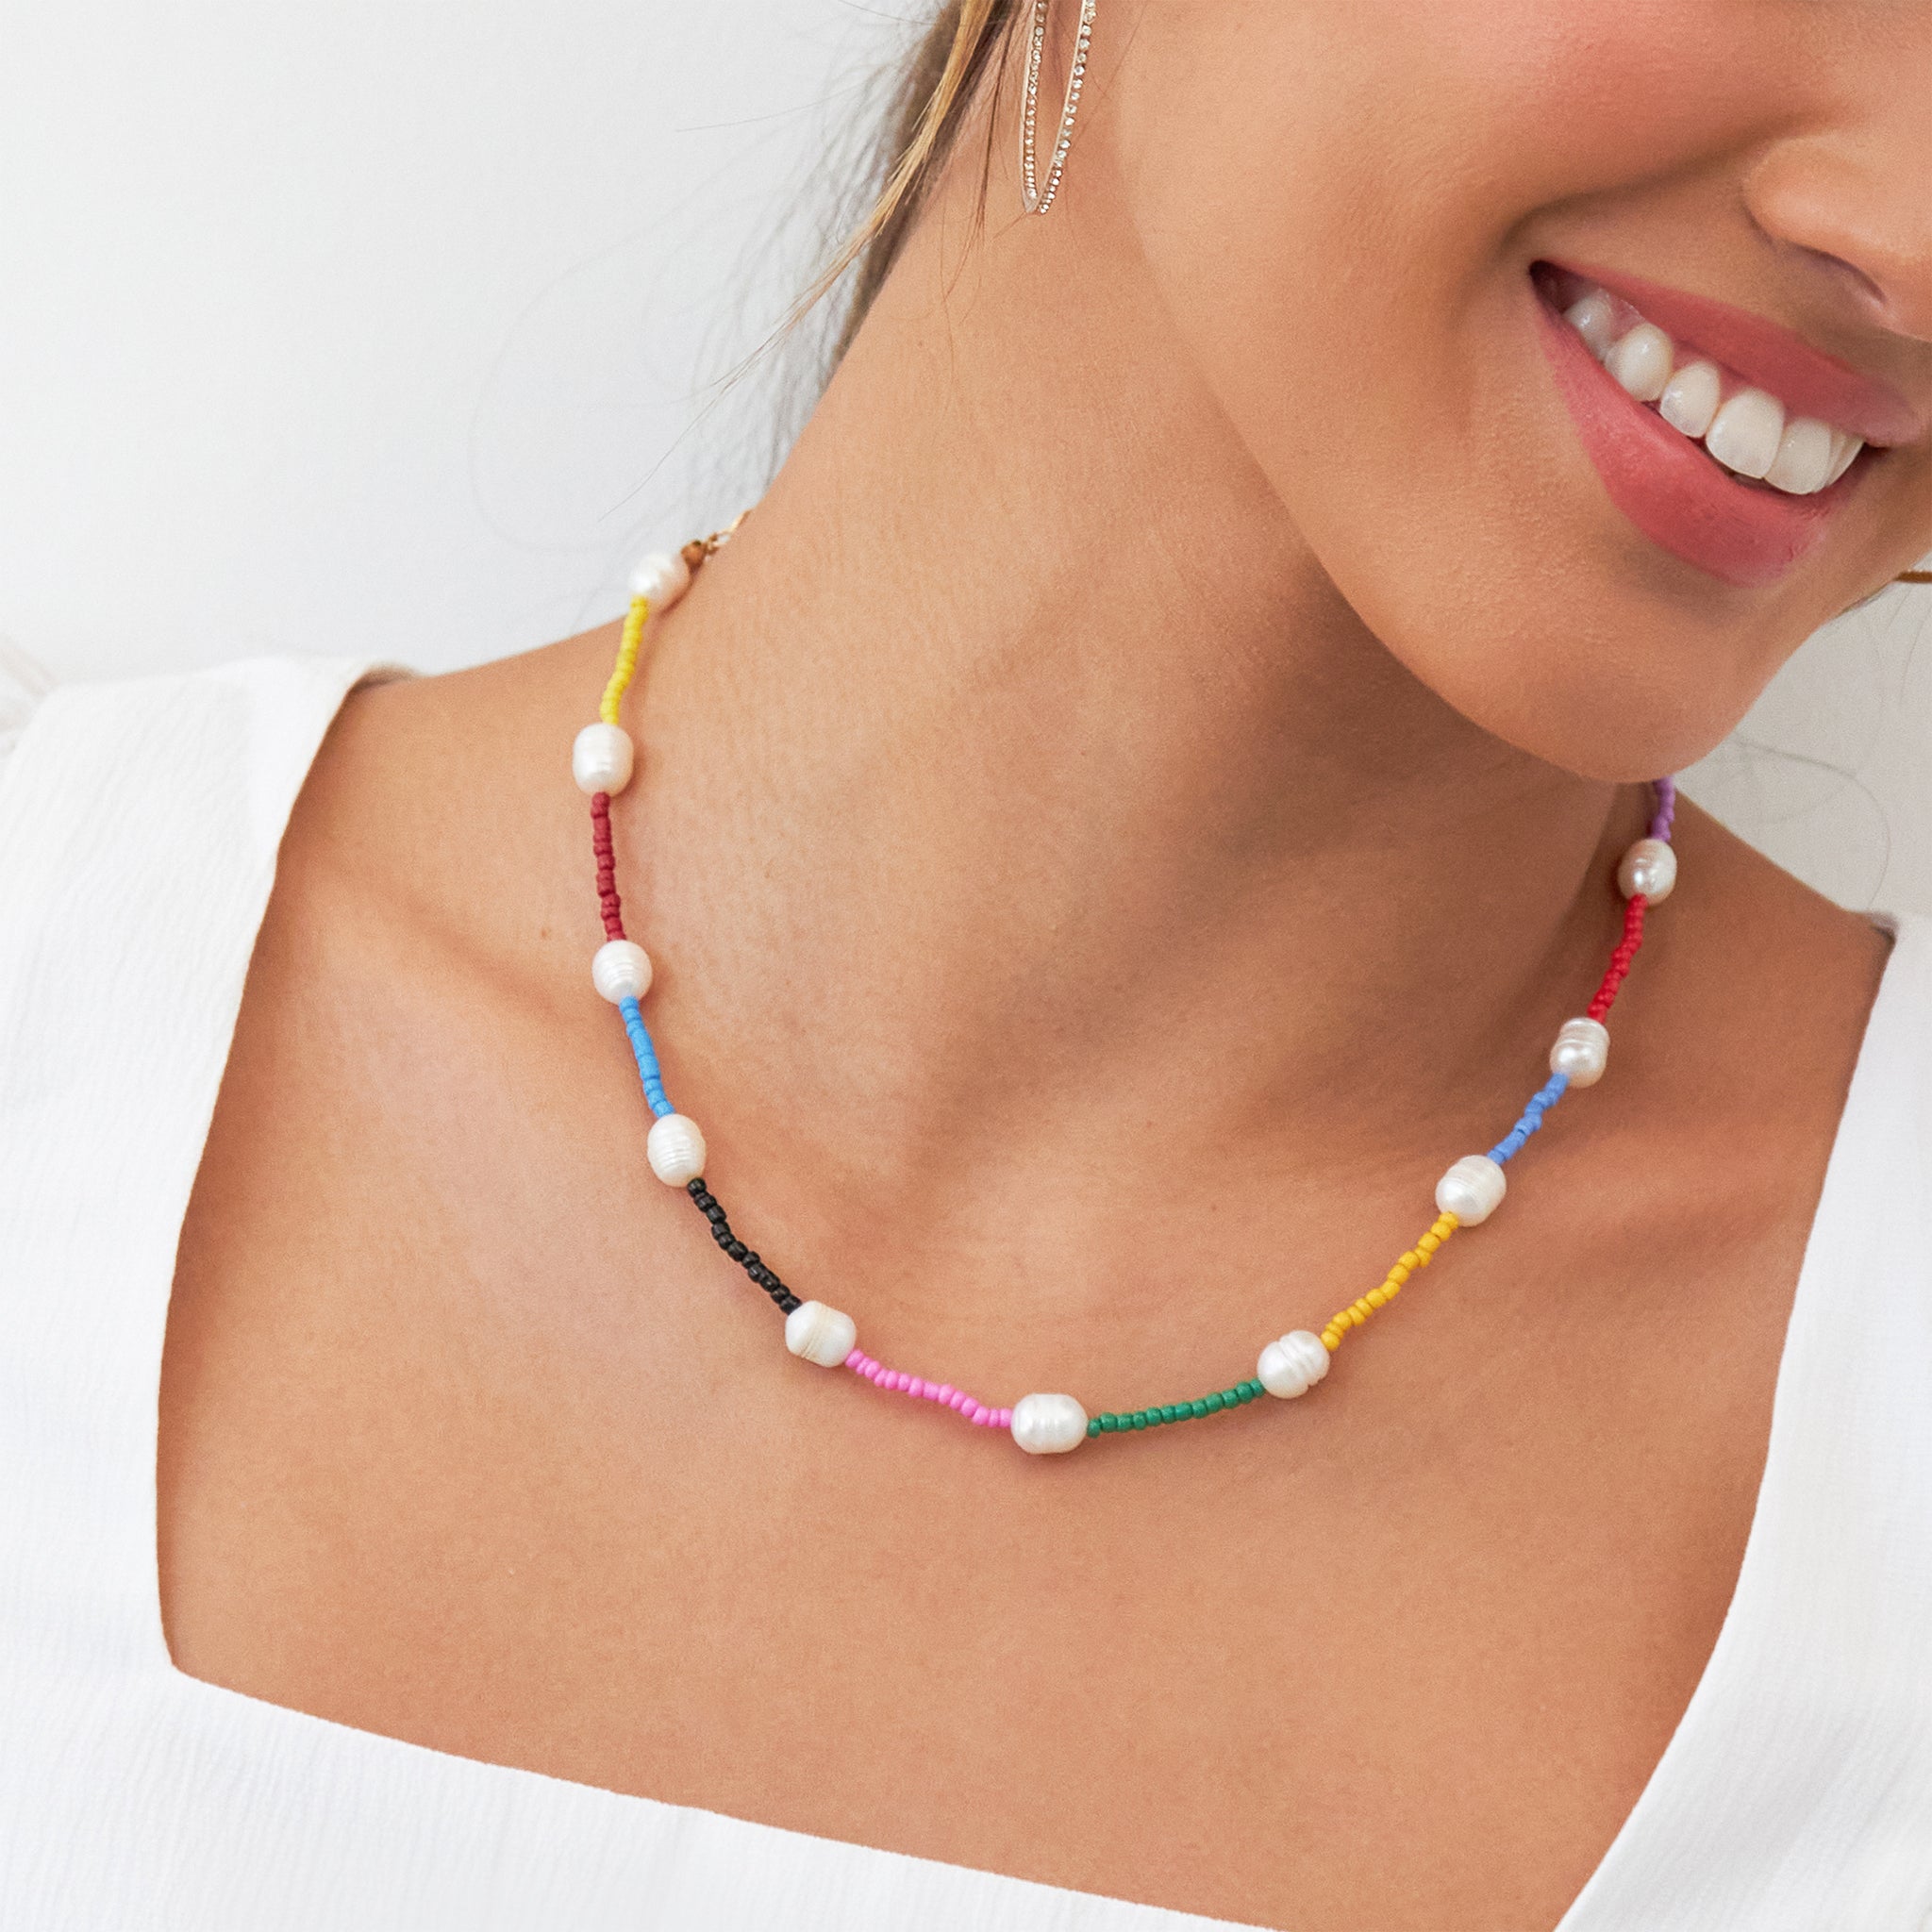 Multicolor Beads and Pearls Necklace